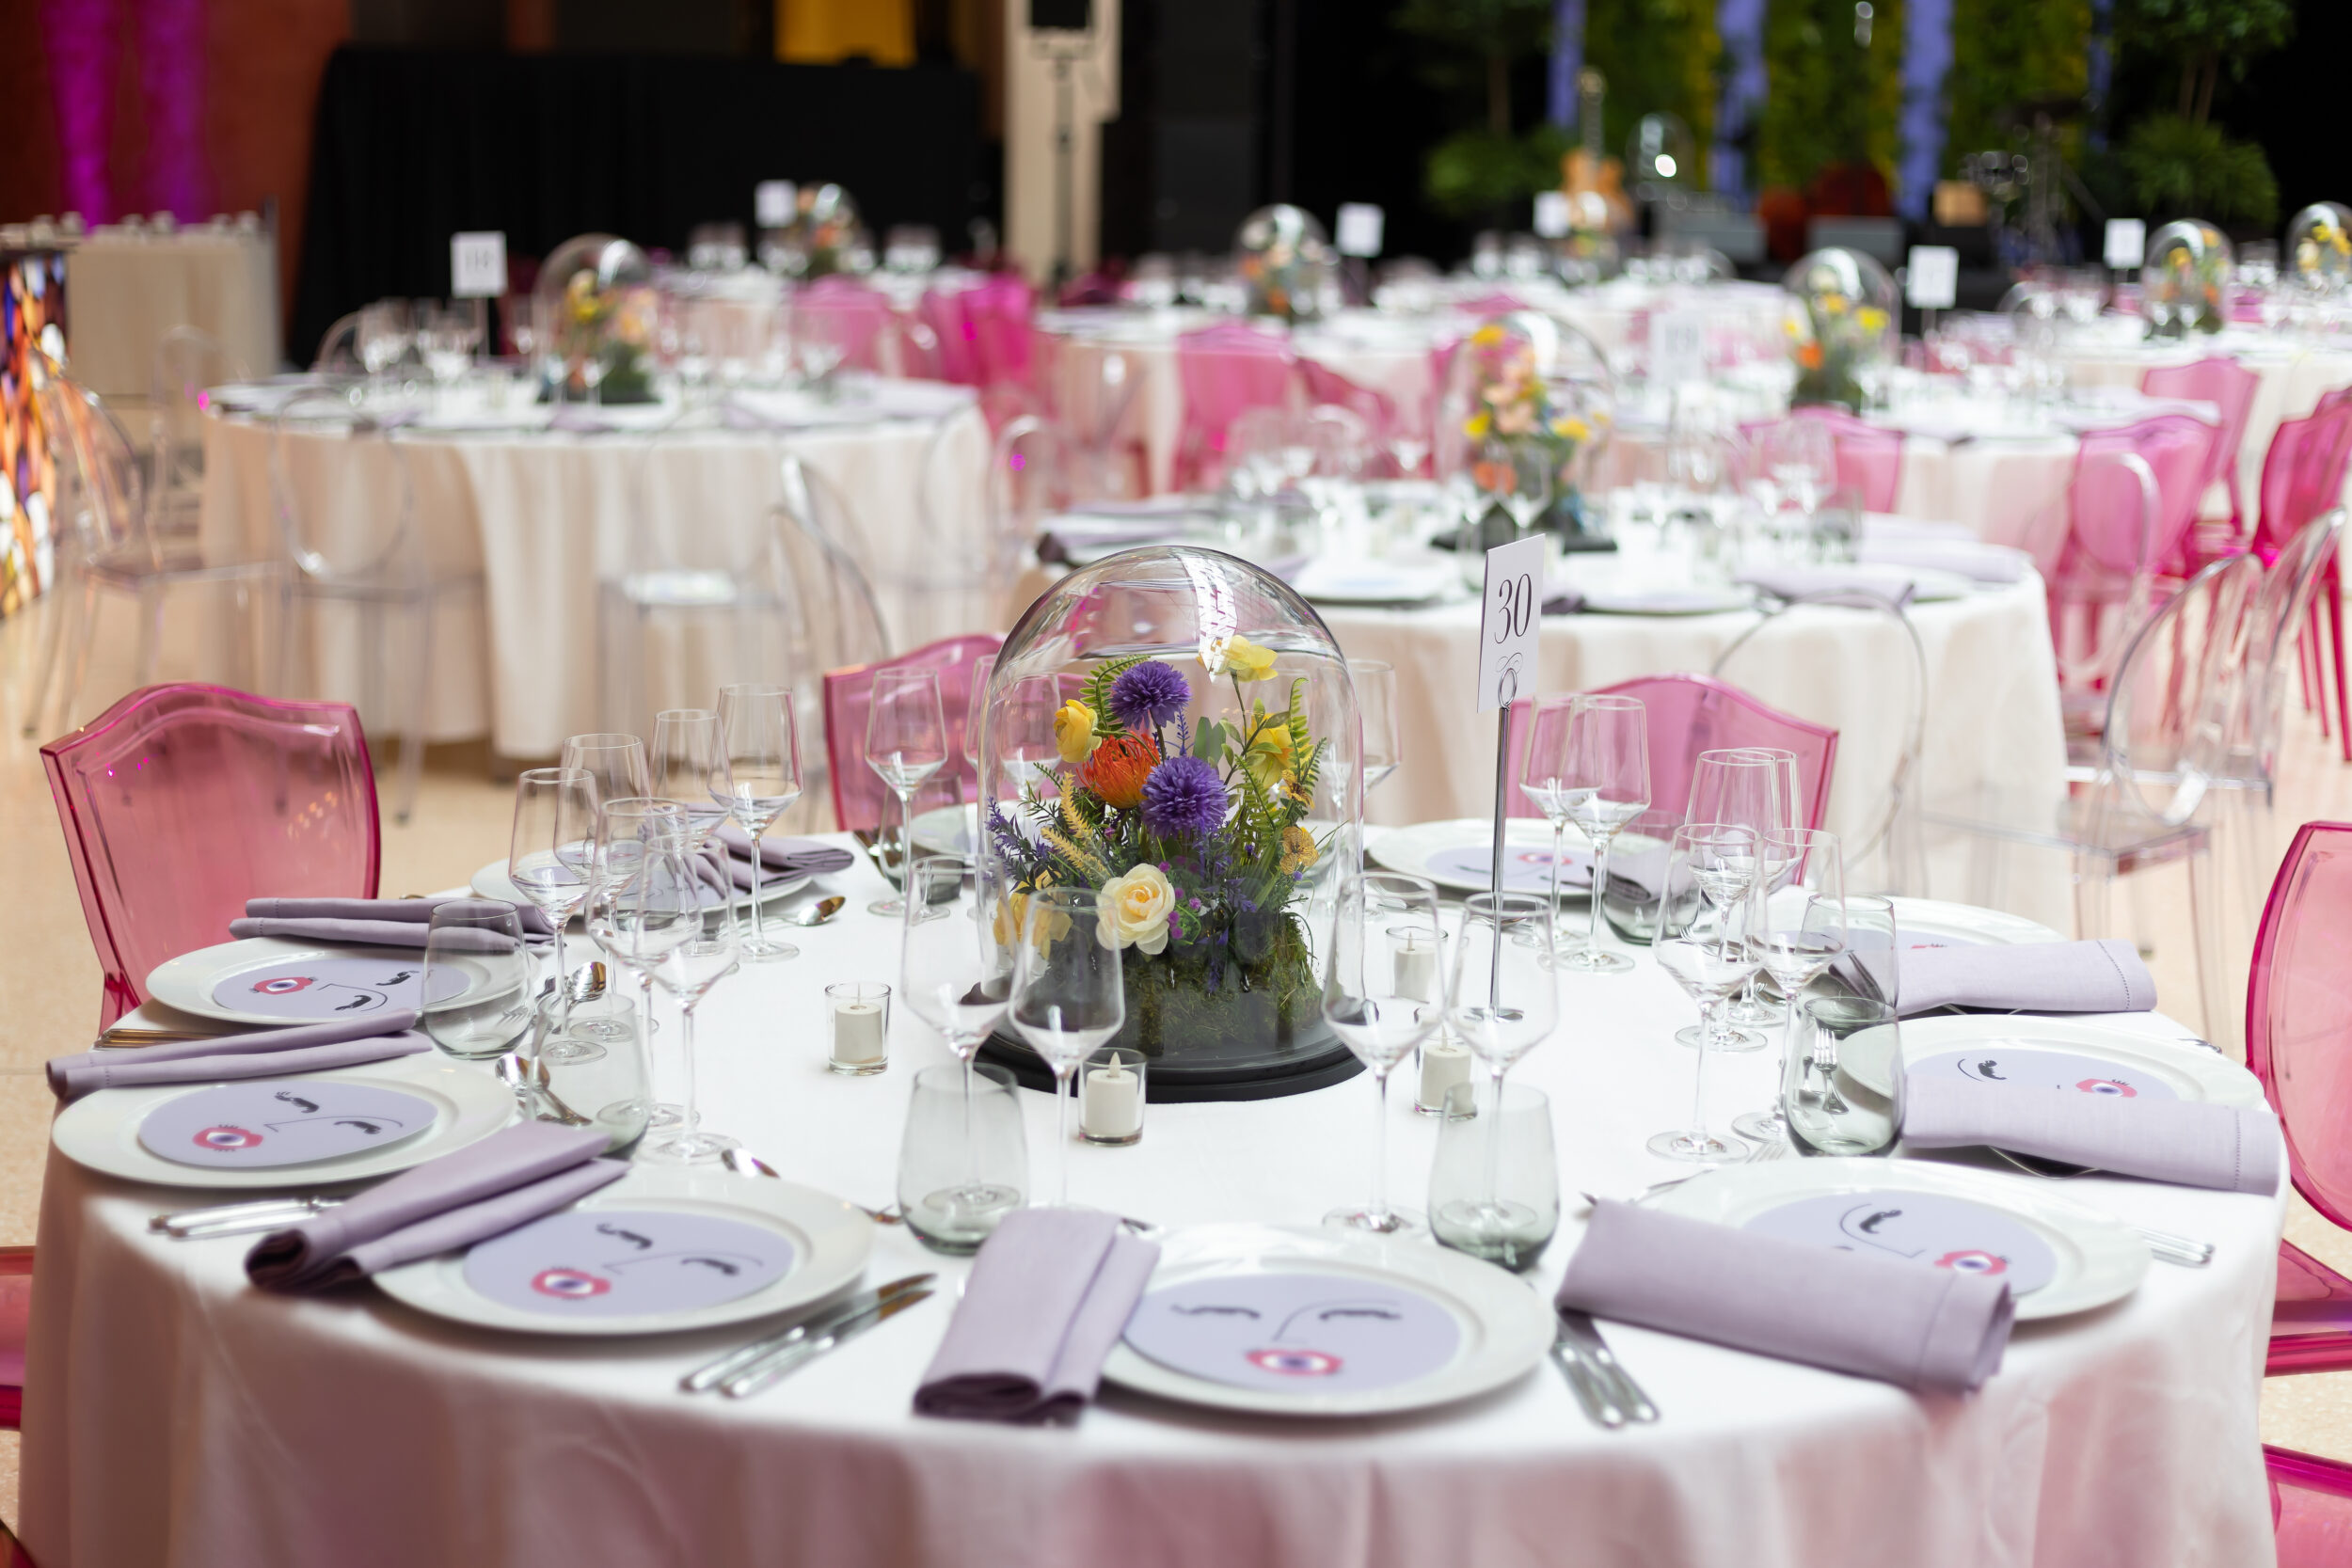 A table setting for a black-tie event with pink acrylic chairs and a small colorful flower arrangement under a glass cloche.